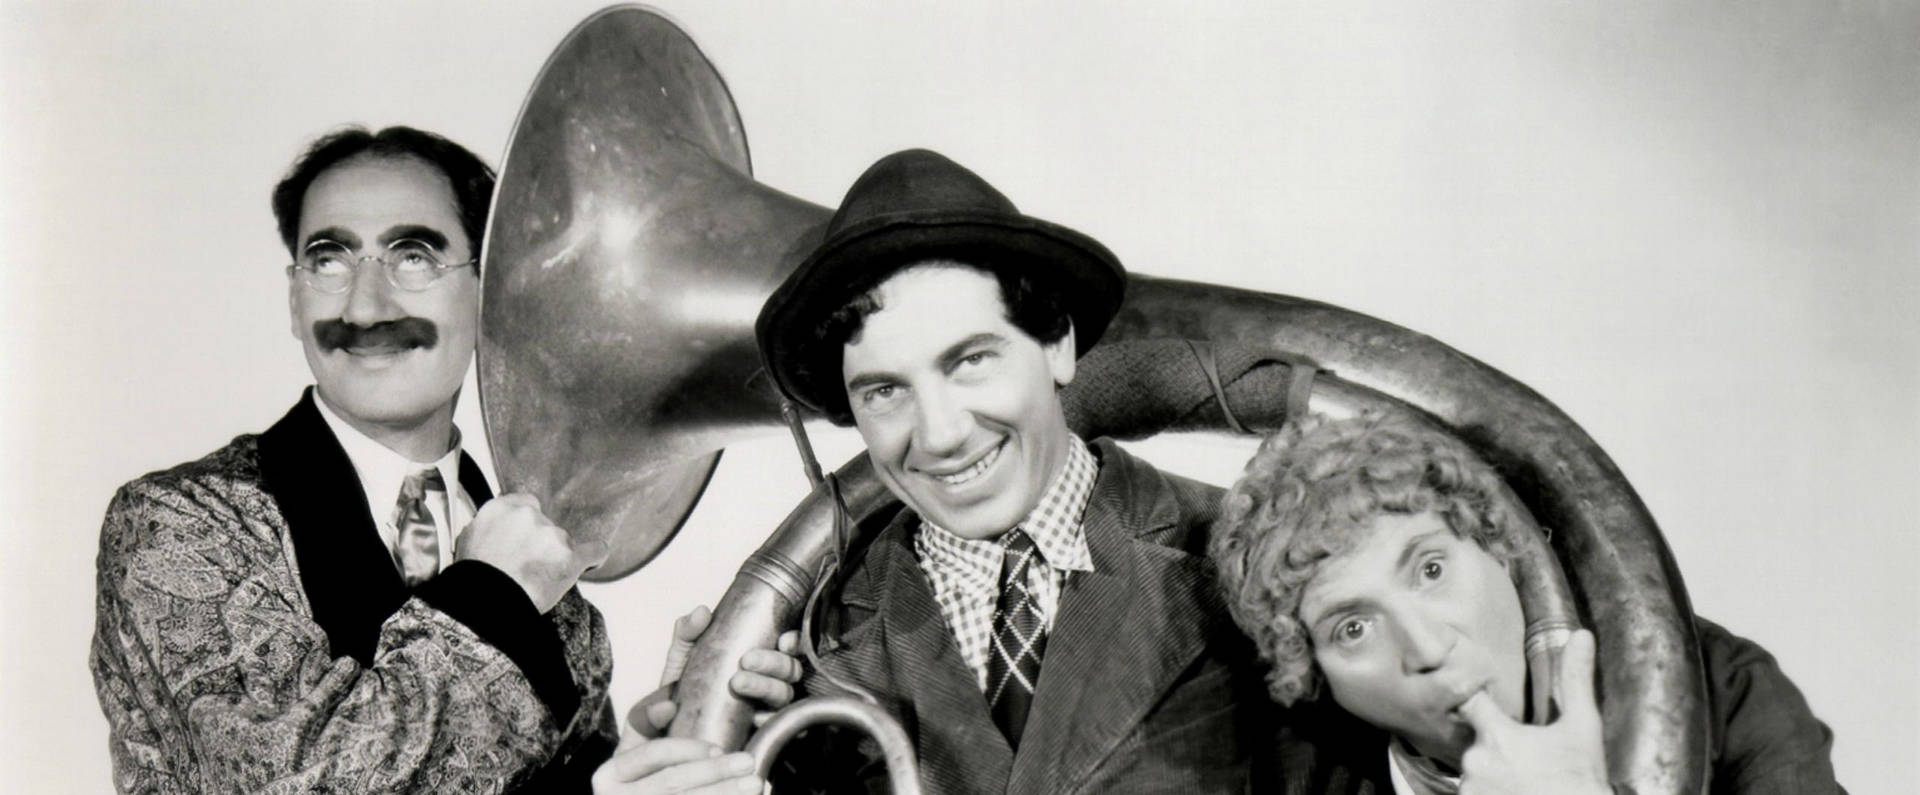 Marx Brothers Holding Sousaphone Wallpaper